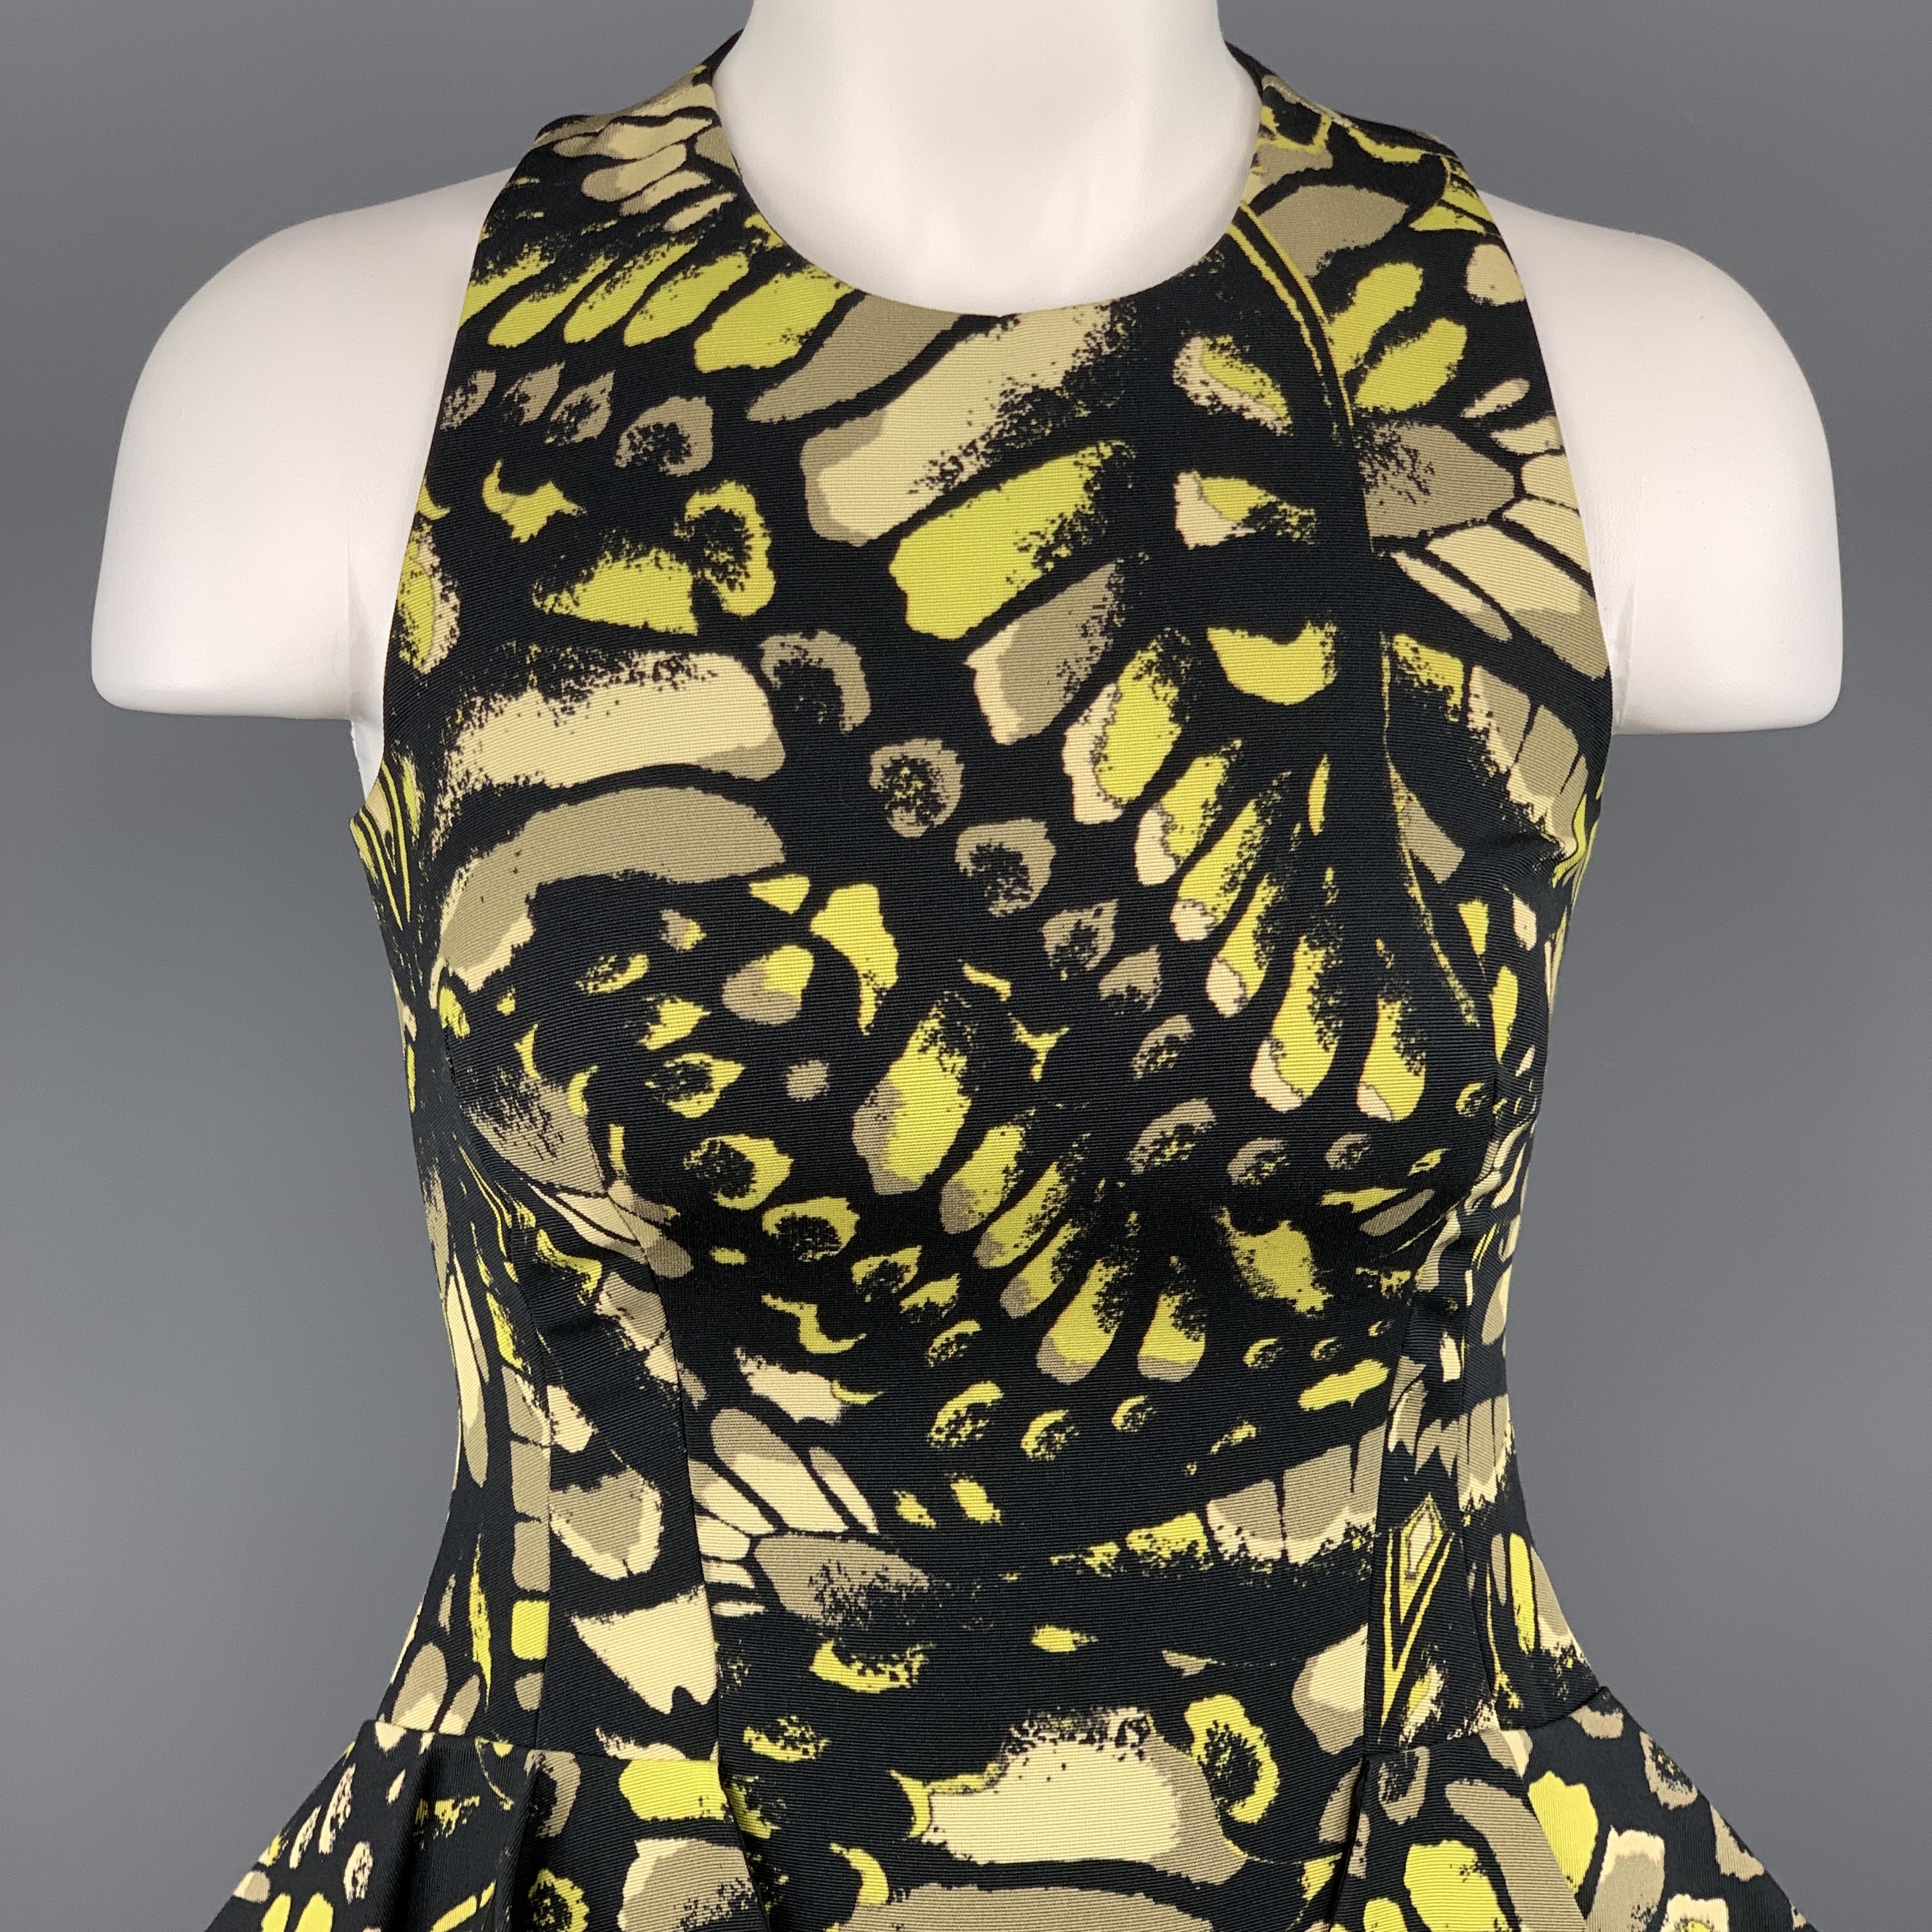 MCQ by ALEXANDER MCQUEEN dress comes in black and lime green butterfly wing print faille with a halter neckline, peplum sides, and AA line skirt. Made in Italy.

Excellent Pre-Owned Condition.
Marked: IT 38

Measurements:

Shoulder: 8.5 in.
Bust: 34